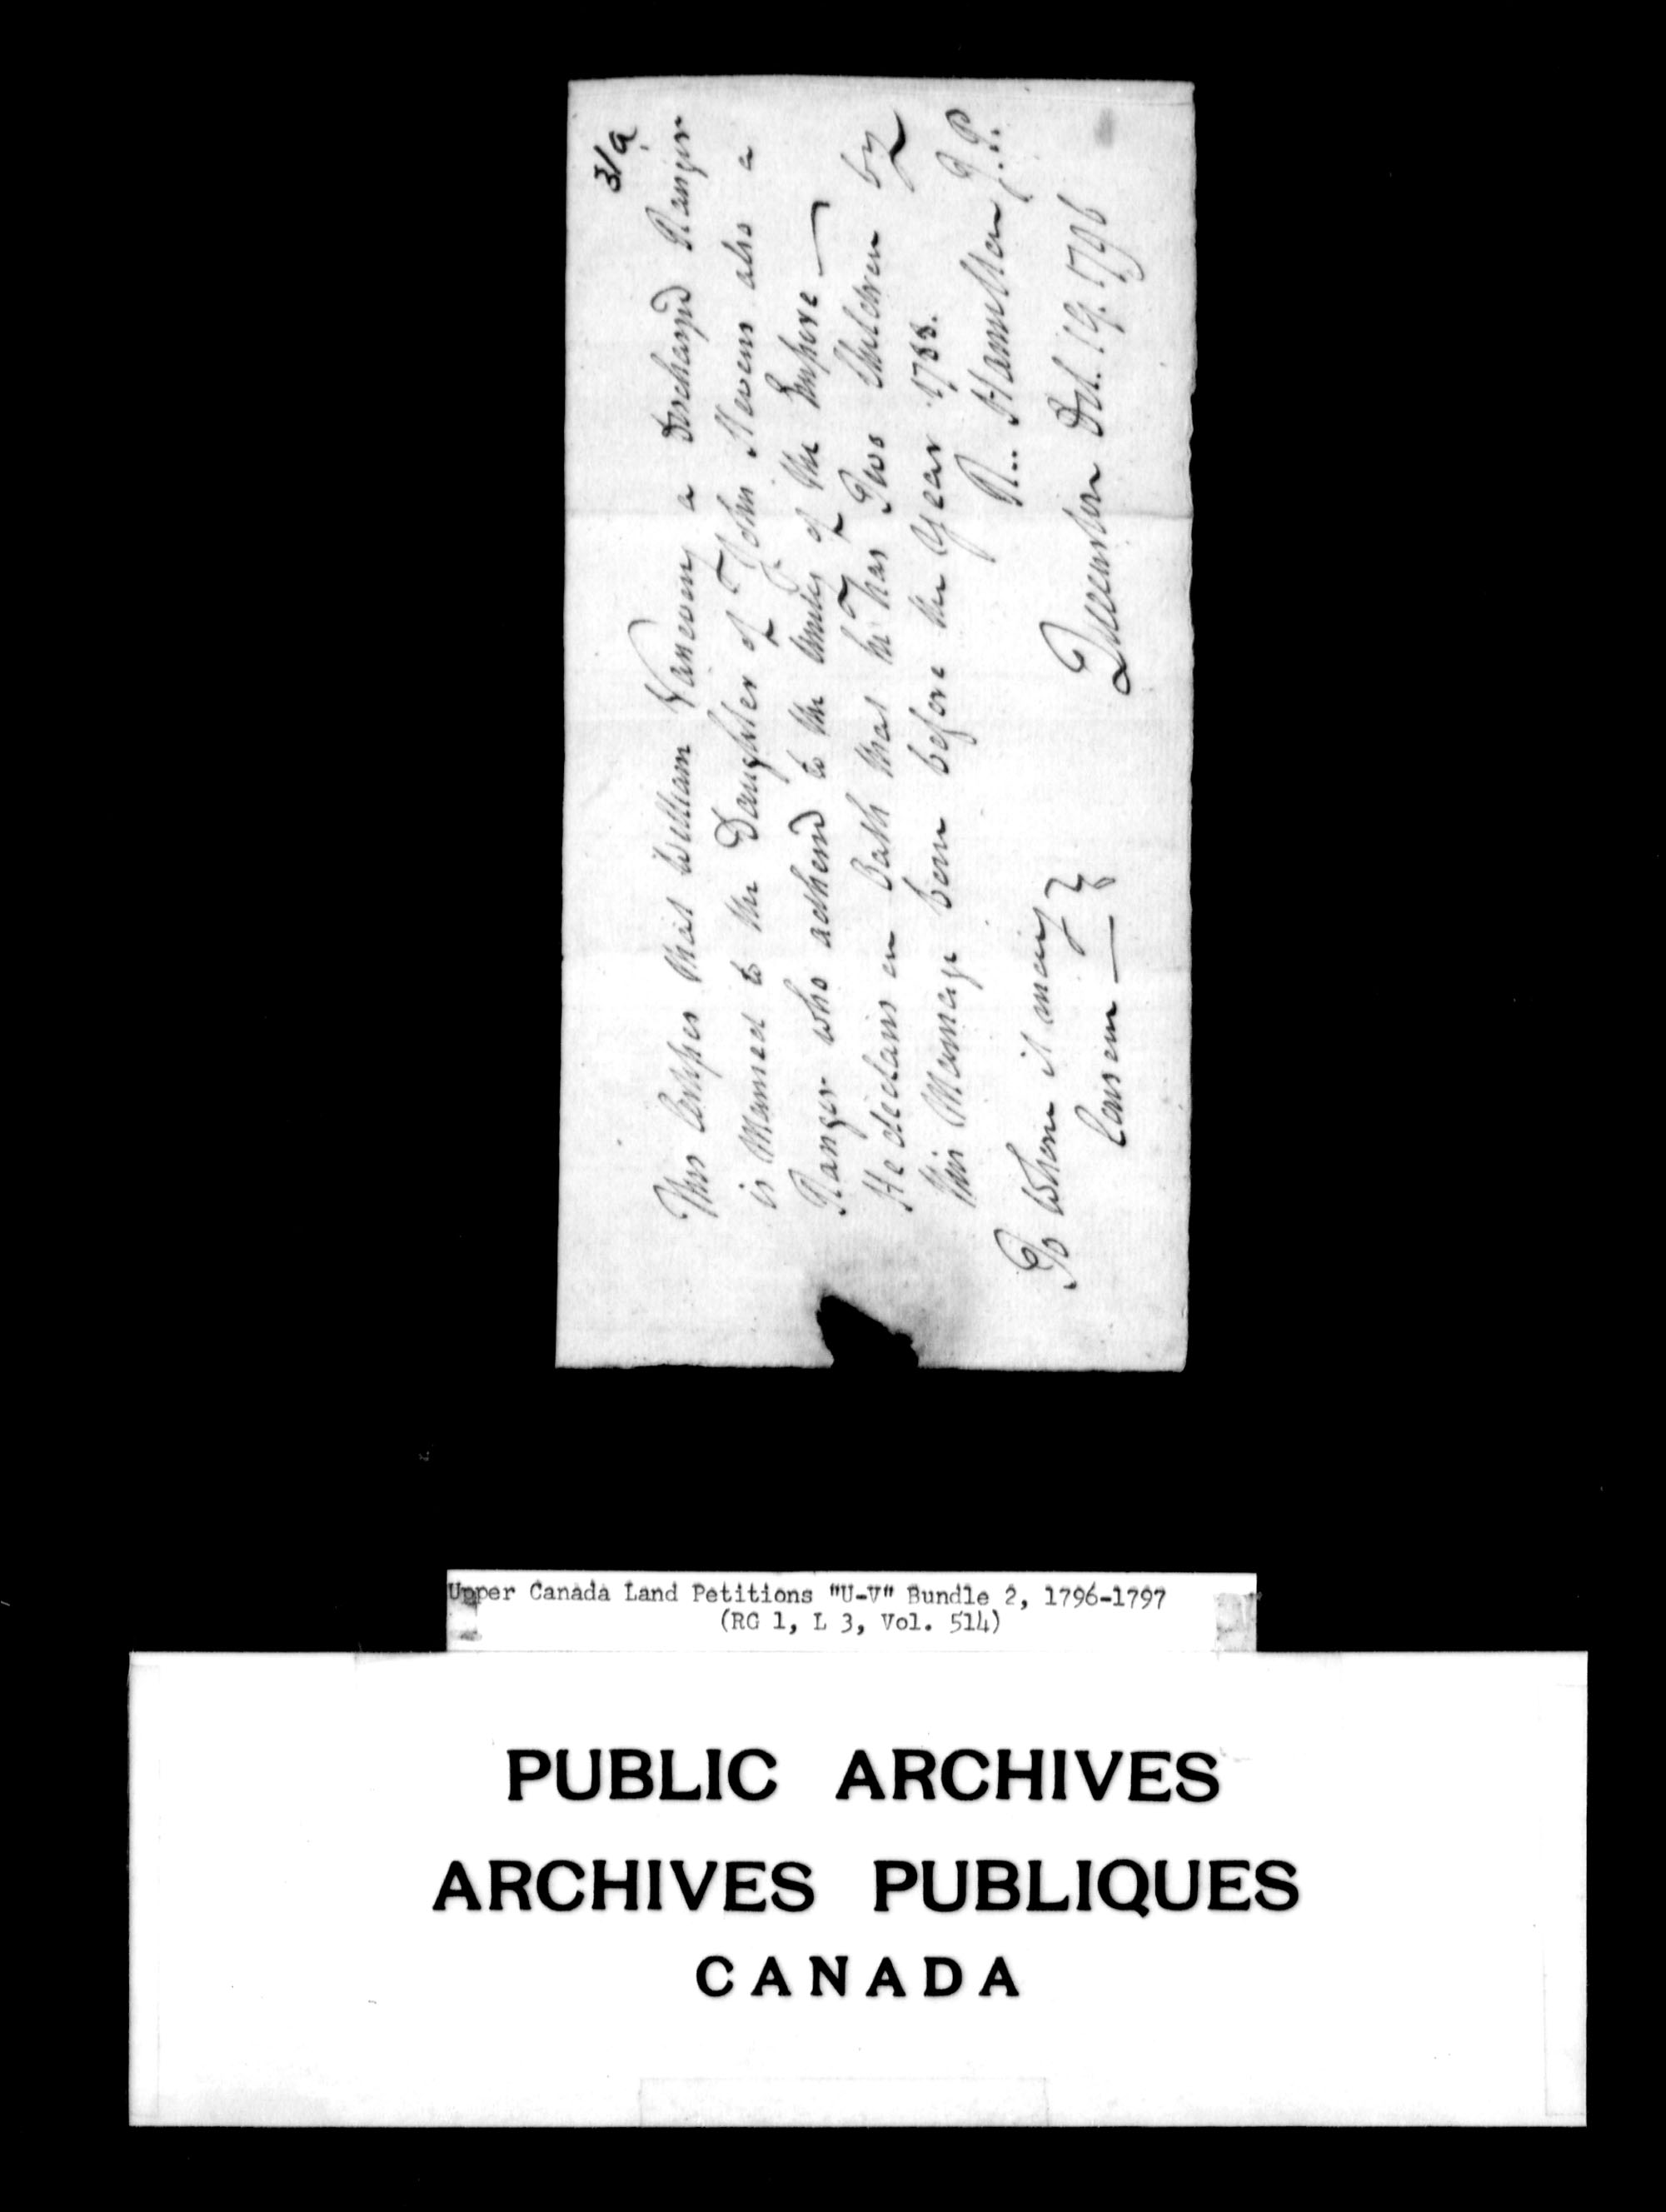 Title: Upper Canada Land Petitions (1763-1865) - Mikan Number: 205131 - Microform: c-2842